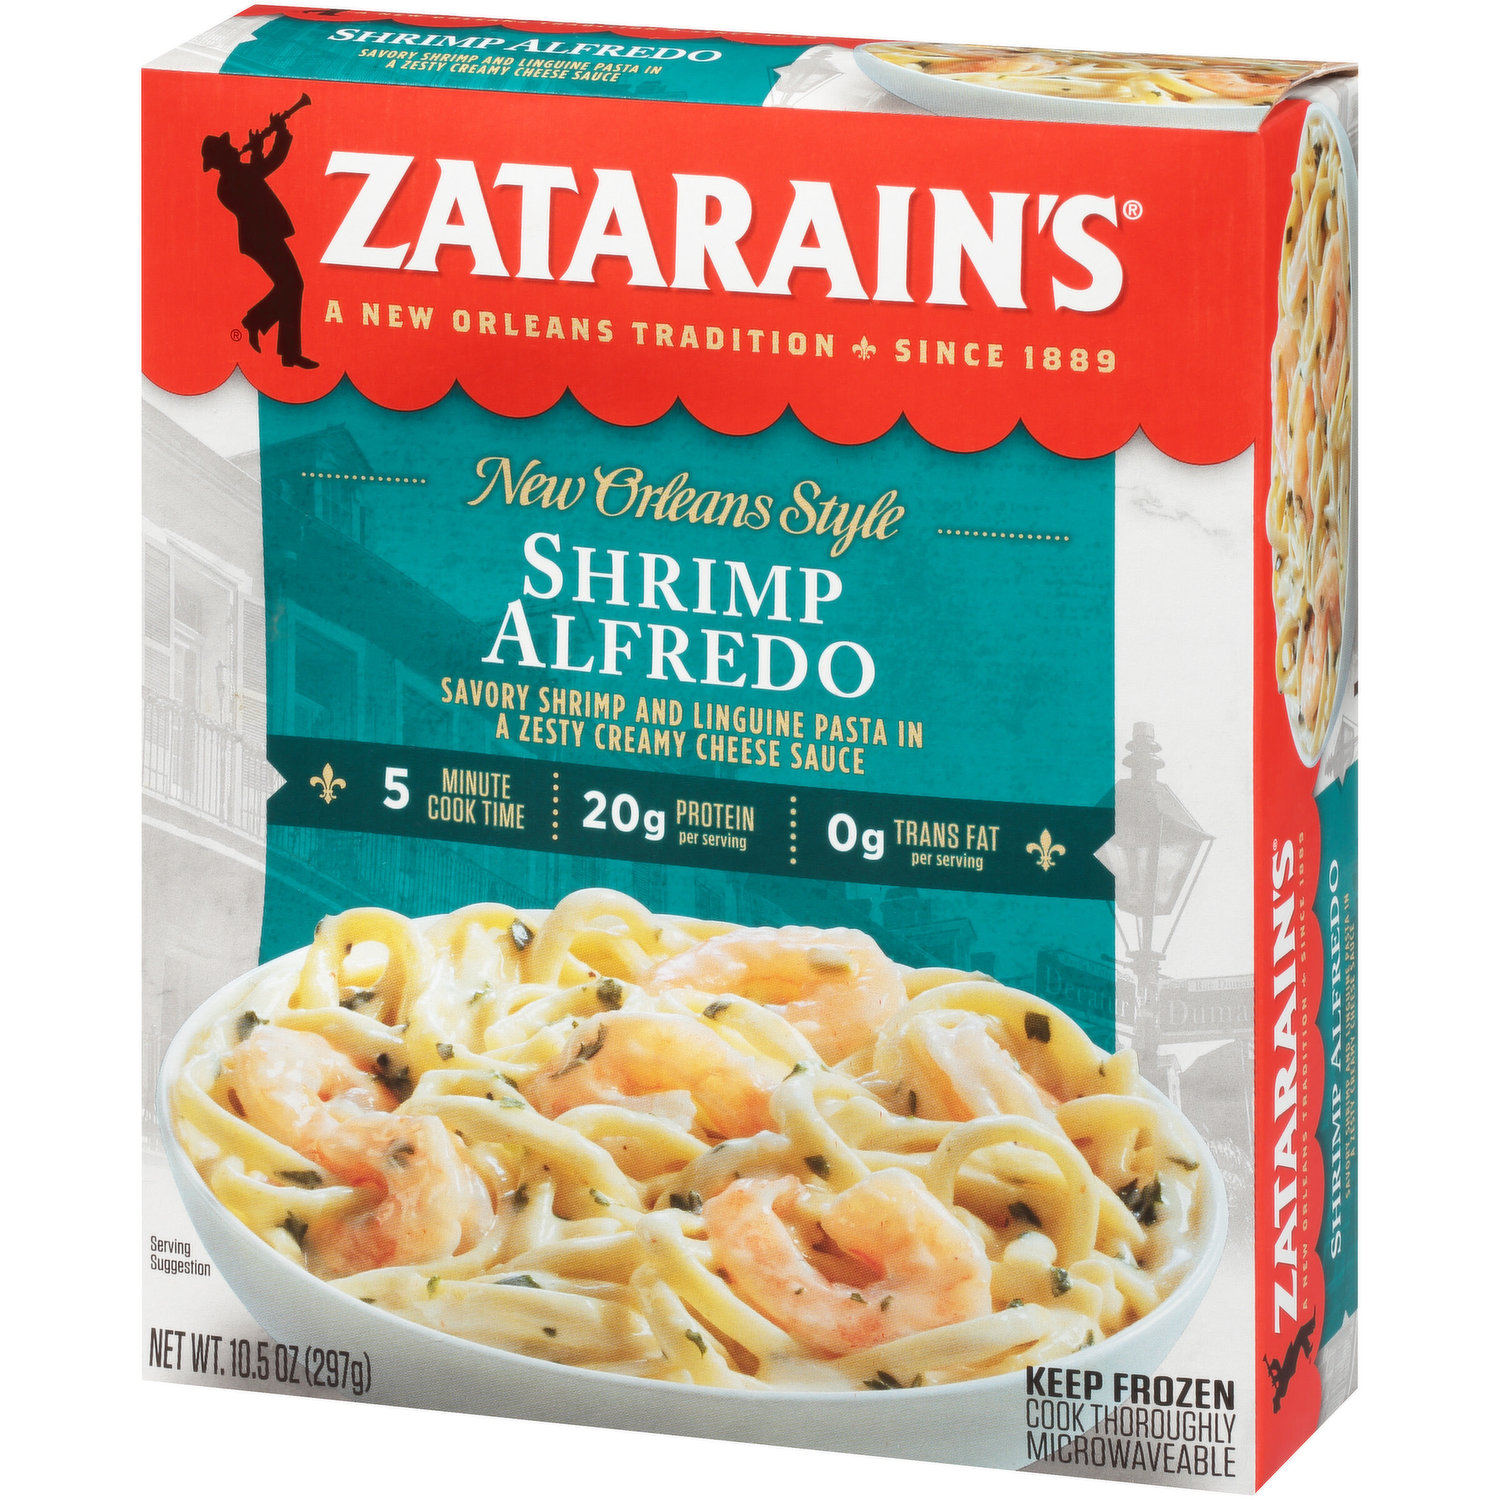 Zatarain's Frozen Meal Red Bean and Rice with Sausage (12 oz